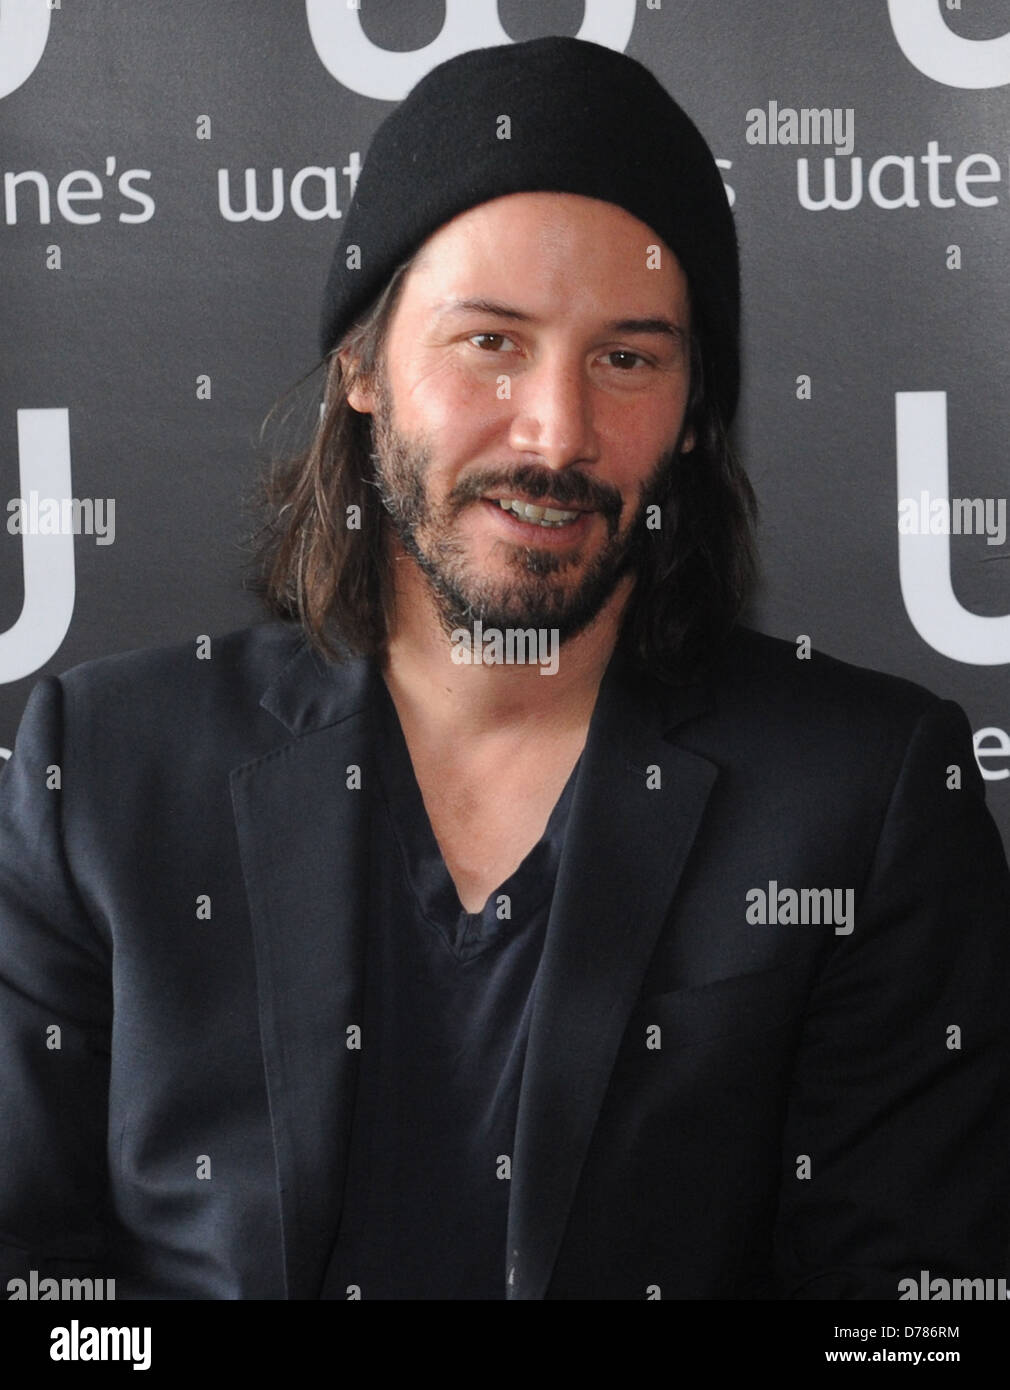 Keanu Reeves at a book signing at Waterstone's, Piccadilly London, England  - 18.06.11 Stock Photo - Alamy